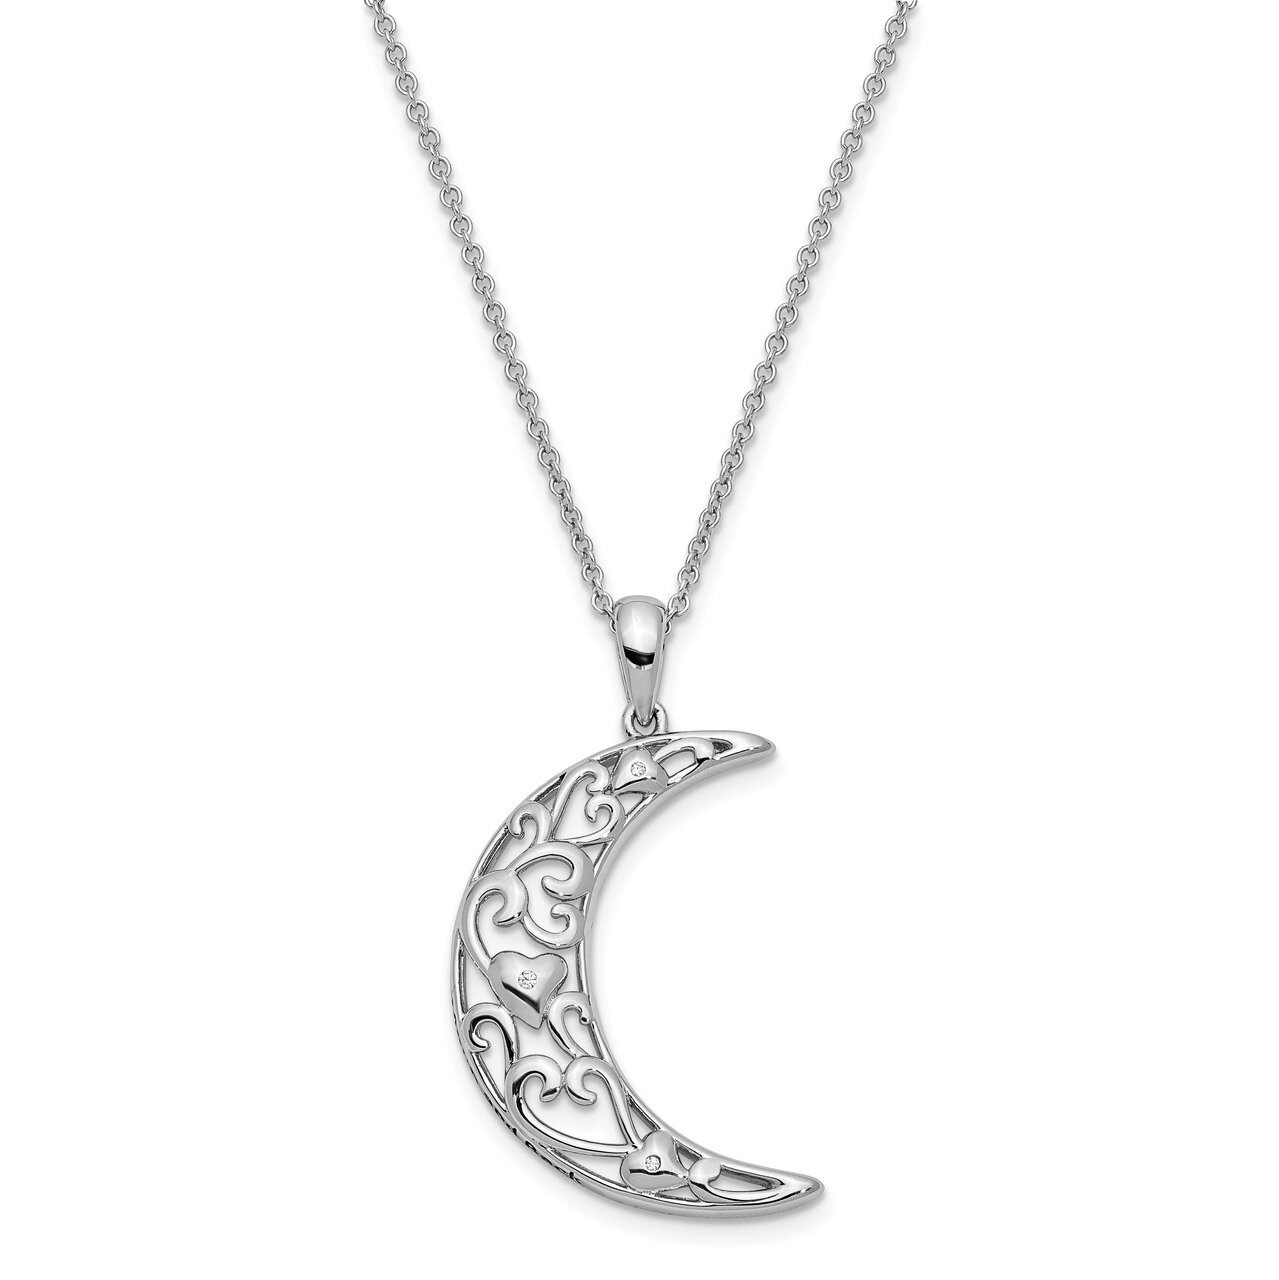 Antiqued Love You To The Moon Back 18 Inch Necklace Sterling Silver CZ Diamond QSX658